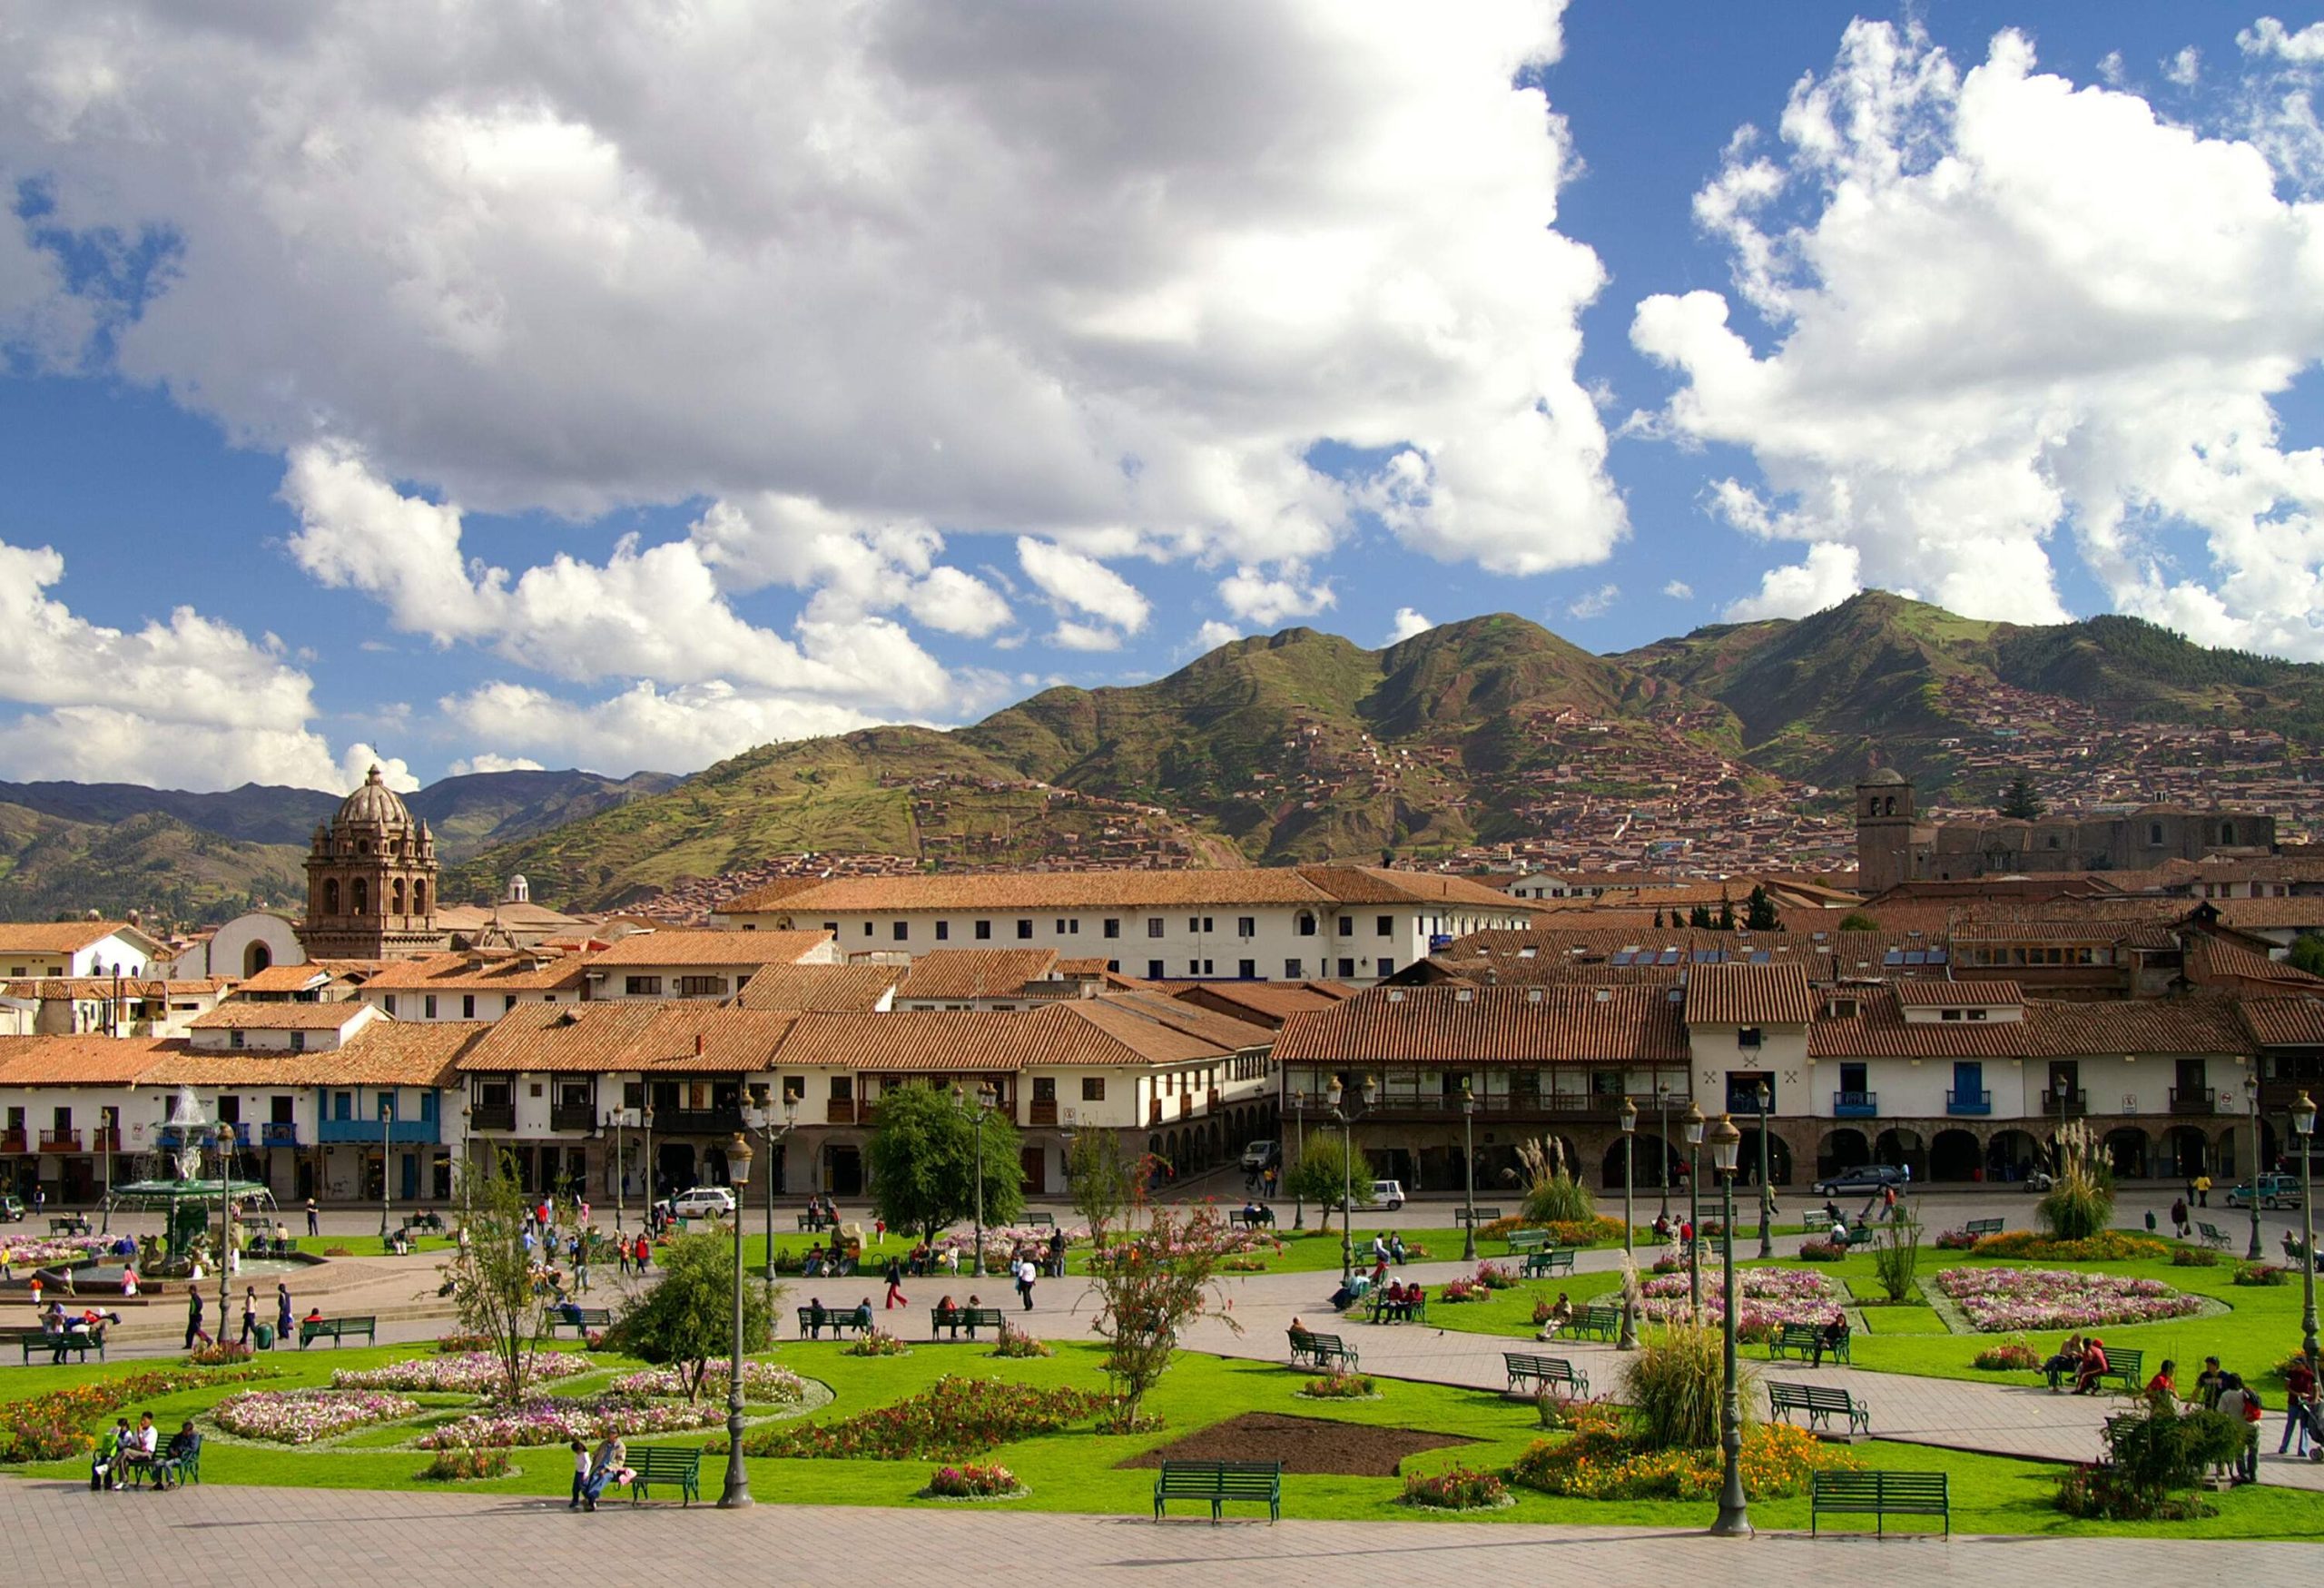 A serene park with its lush green turf adorned with scattered benches and trees stands tall in the background, while buildings stand tall in the background and a majestic mountain range stretches ahead.